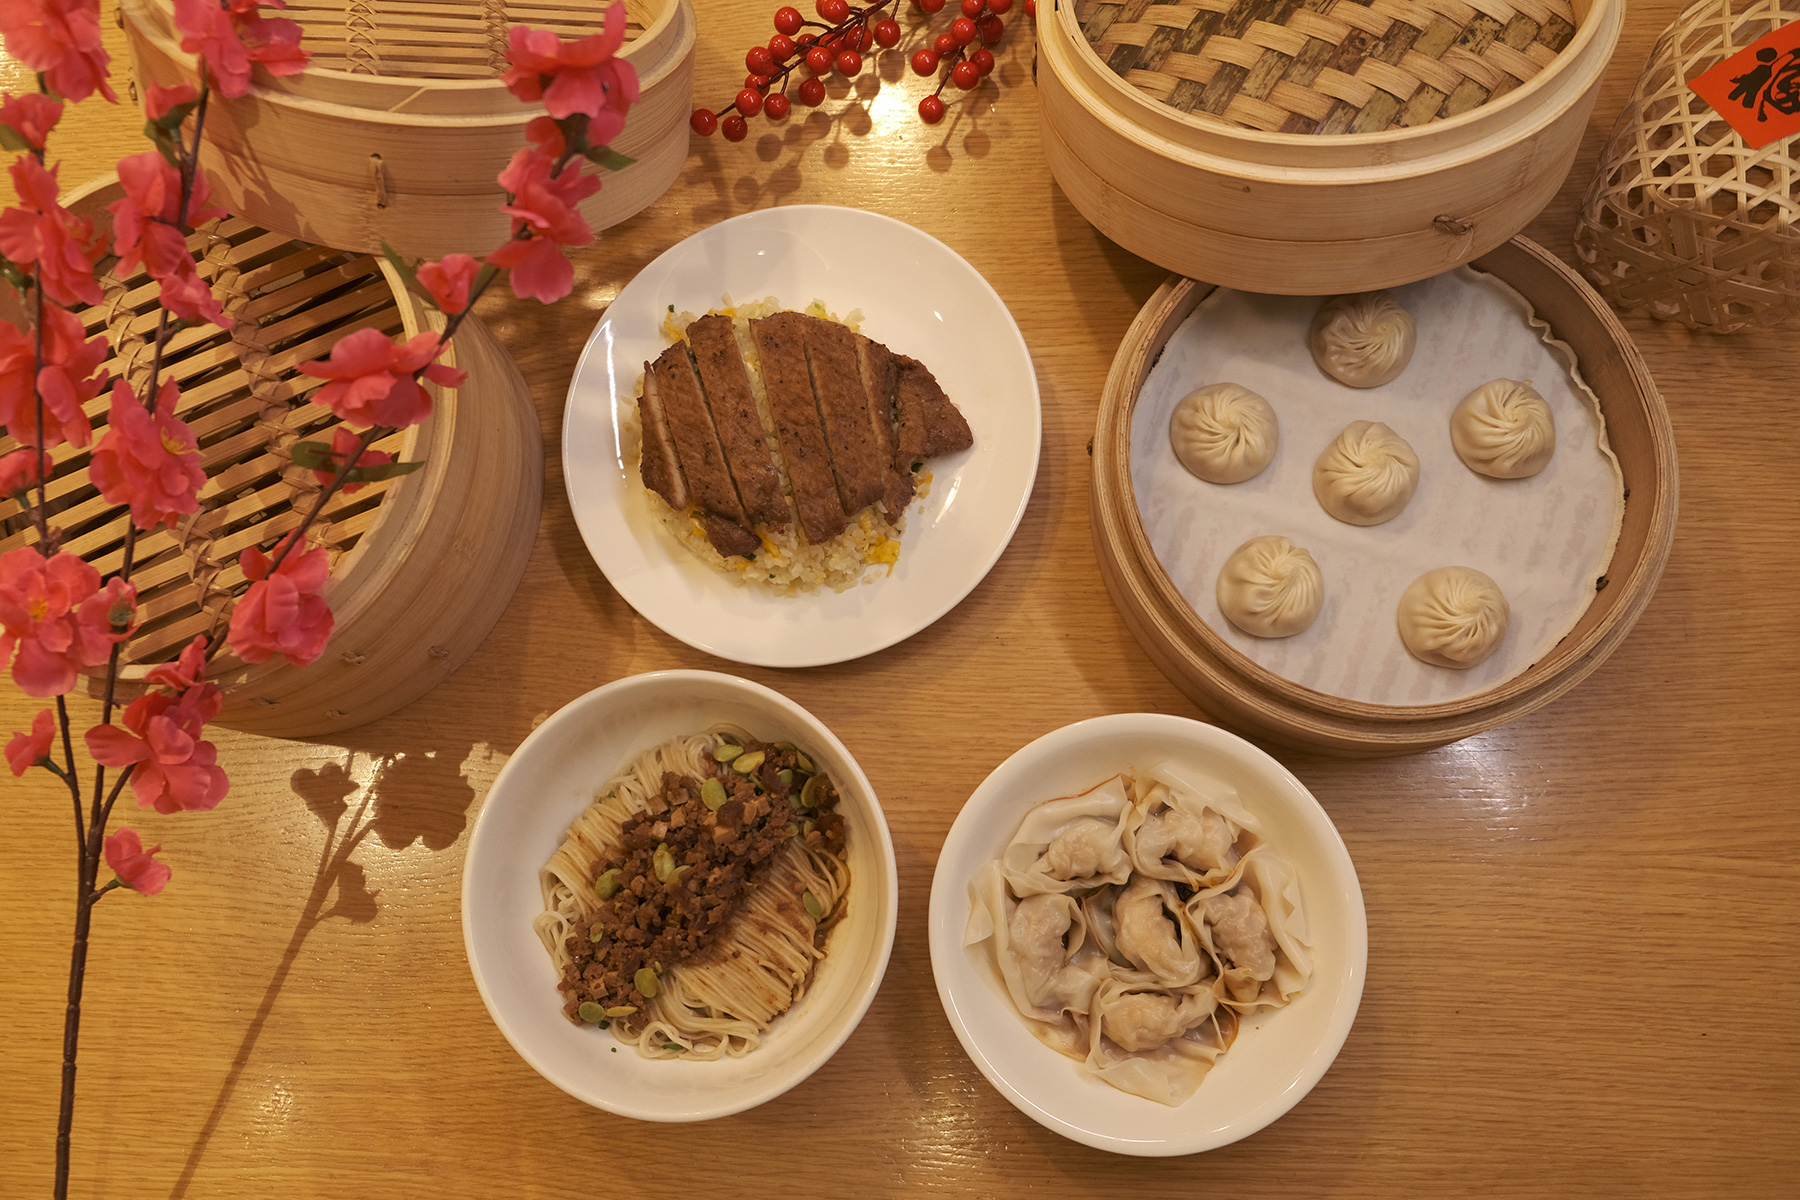 Must we say any more? Don’t walk, run, to Din Tai Fung for their Xiao Long Bao, Pork Chop Egg Fried Rice, Minced Pork Bean Sauce Noodle and their Wontons!